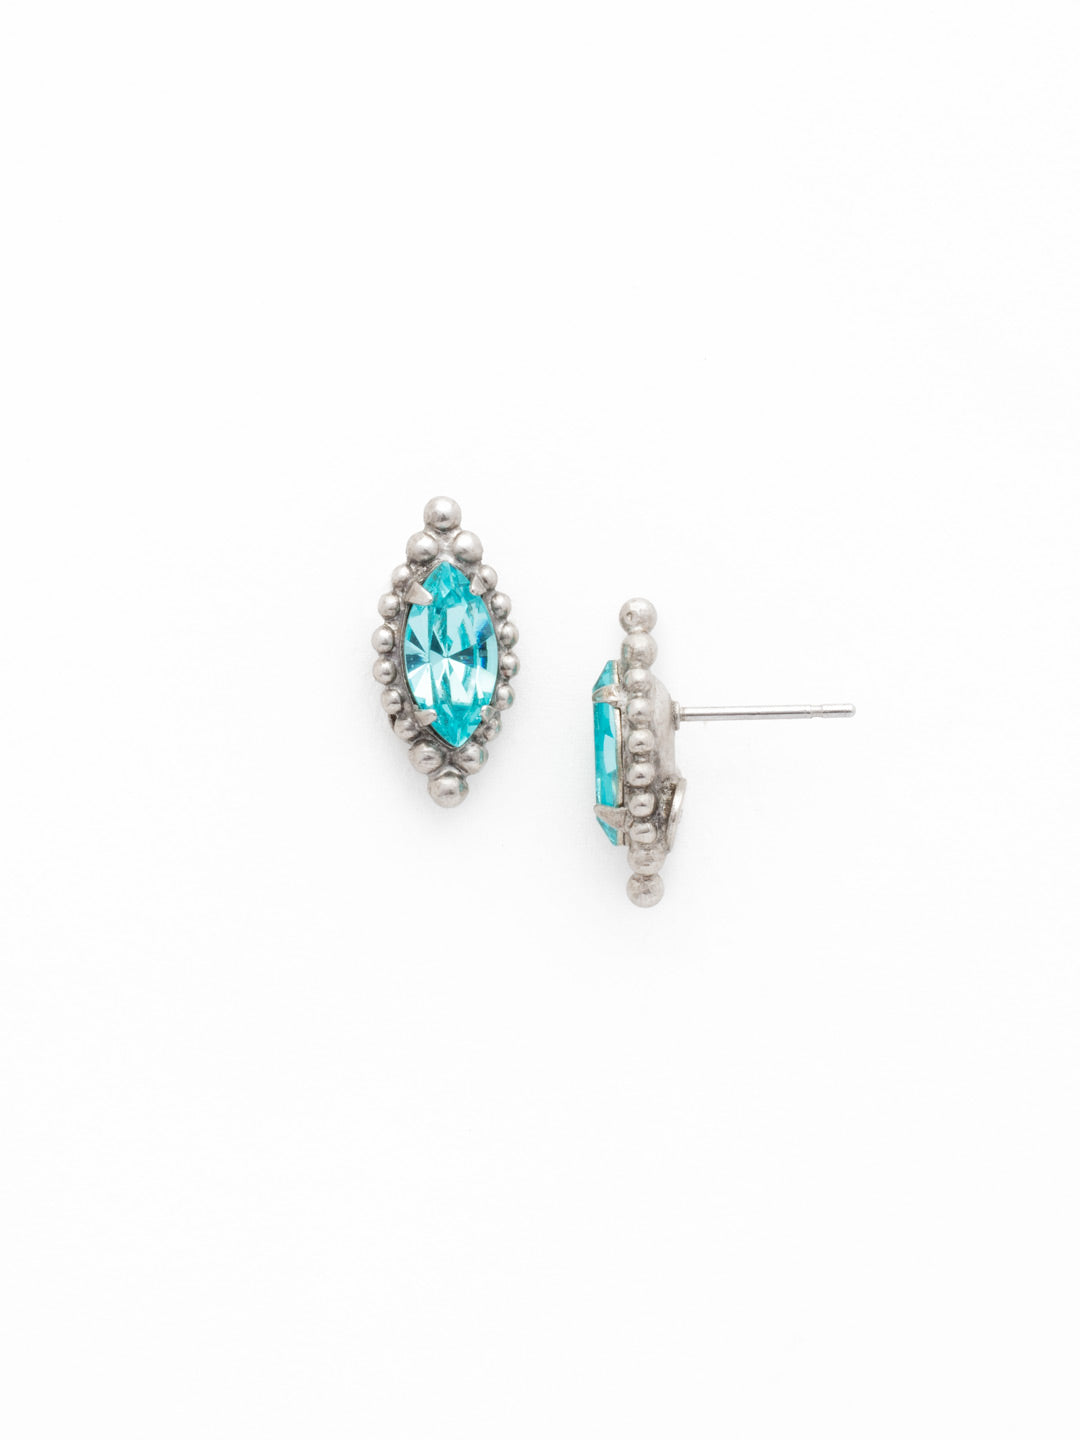 Navette Cut Solitaire Post Earrings - EDG1ASTT - A simple, yet stunning navette cut crystal outlined with a decorative edged border.